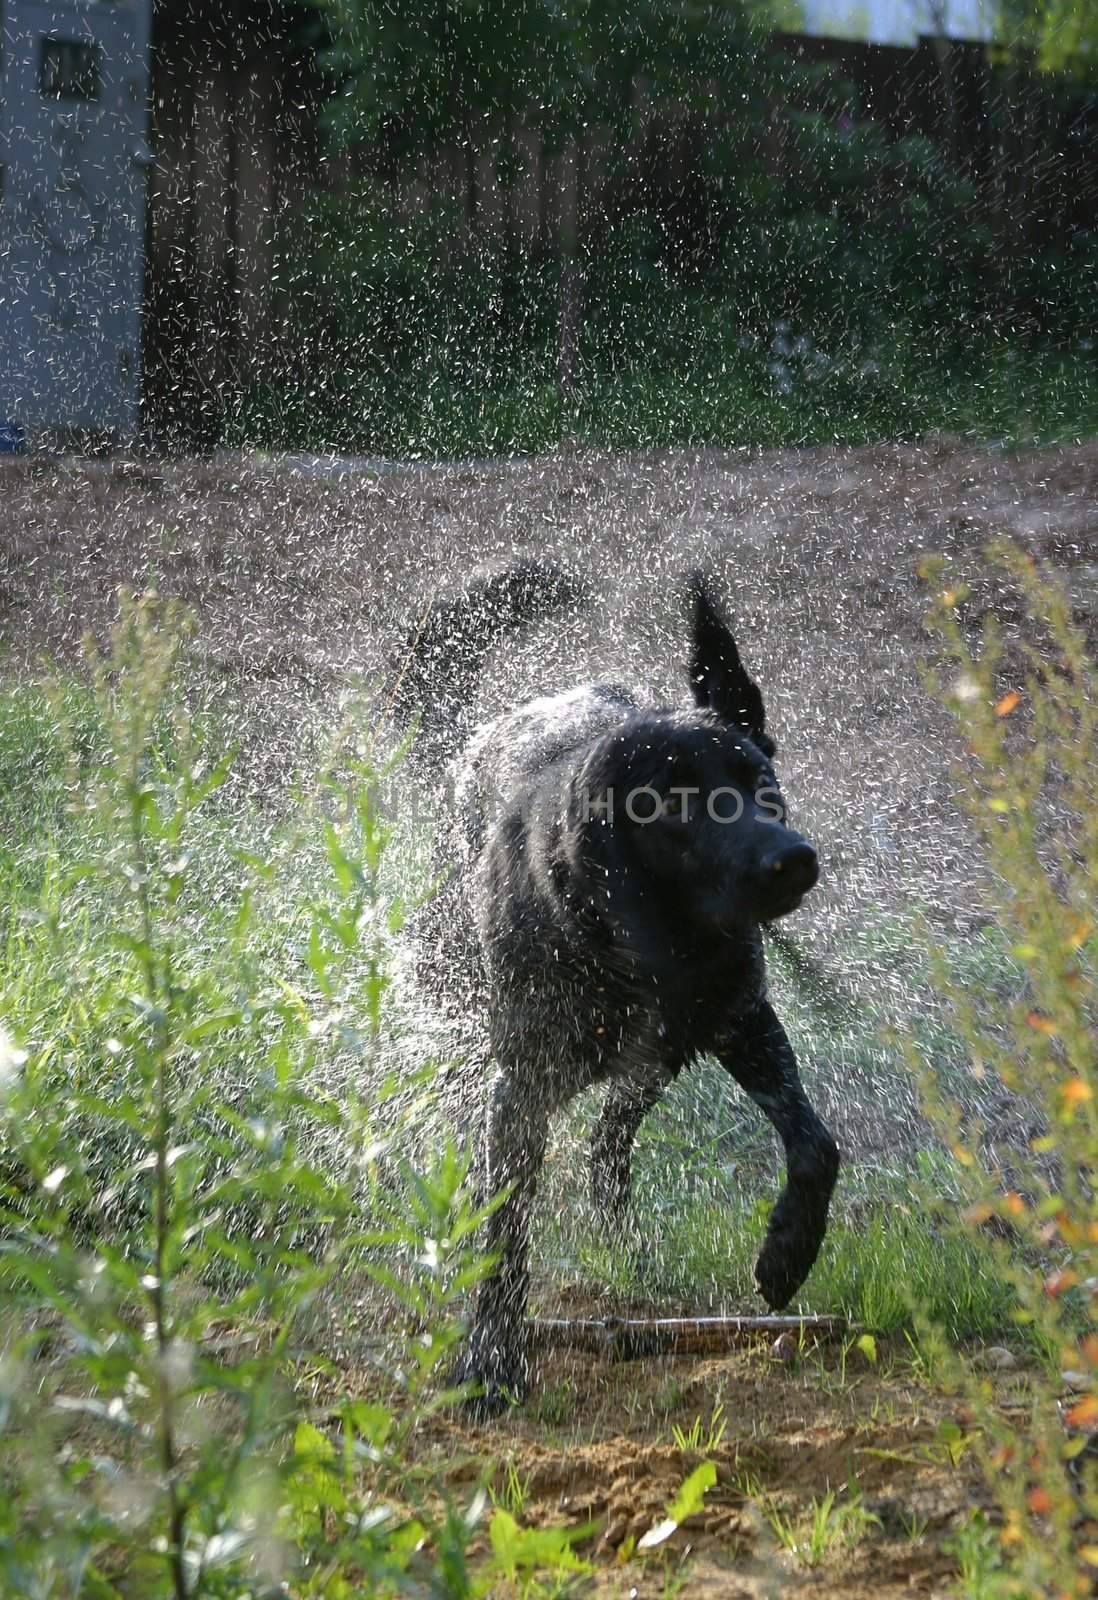 Wet dog in sparks. Illustration to magazine about animals